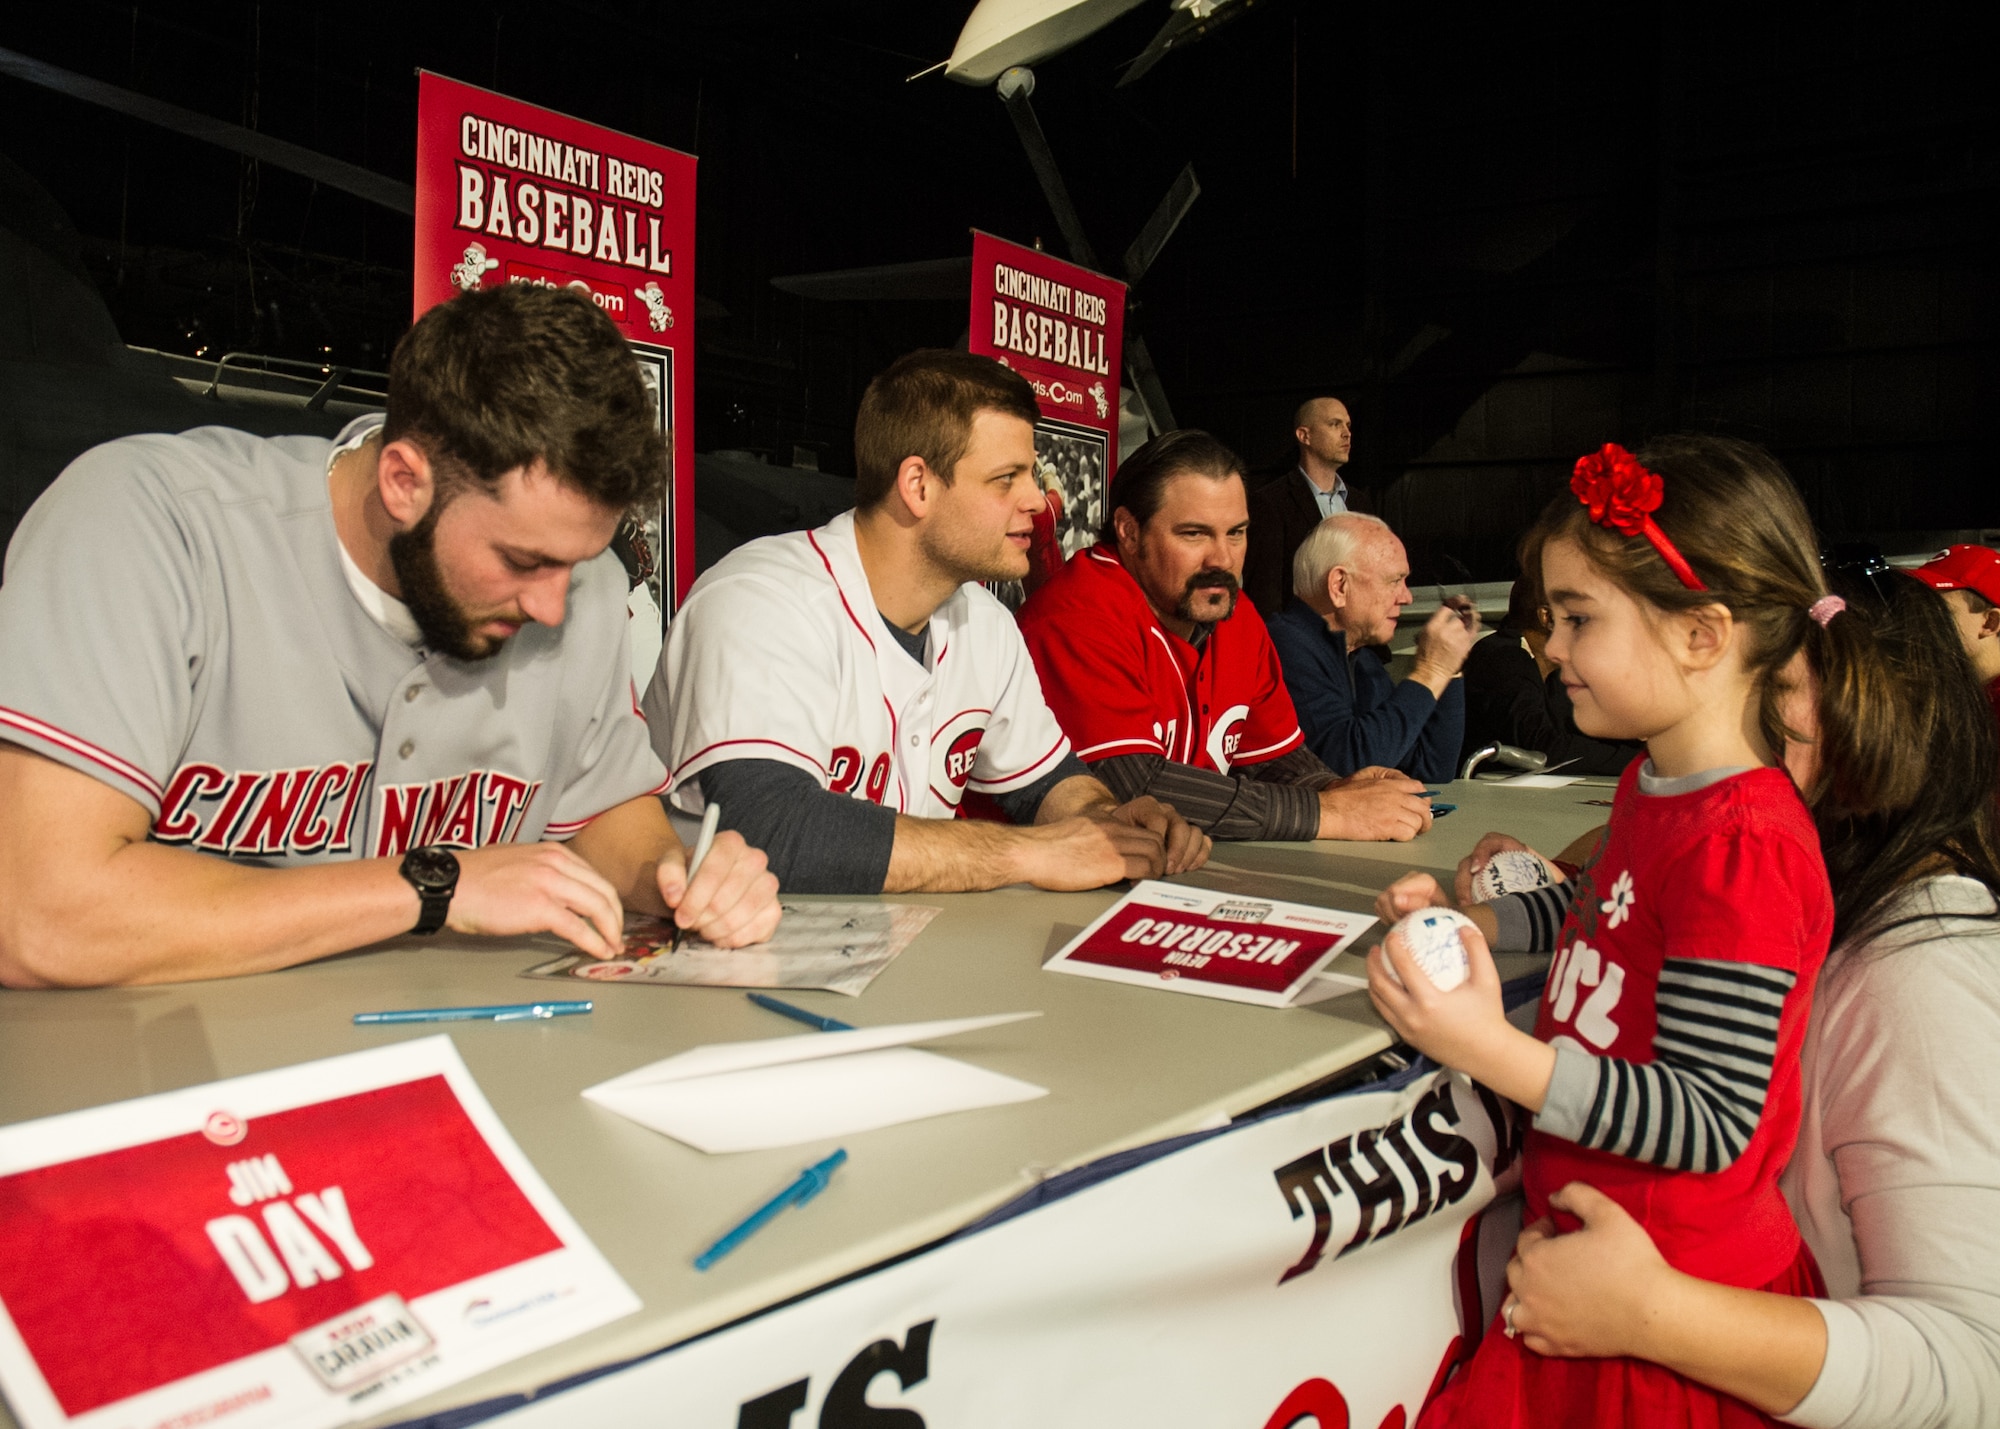 National Museum of the U.S. Air Force visitors had the opportunity to meet members of the Cincinnati Reds organization on January 30th, 2016. Here minor league pitcher Cody Reed signs his autograph for a fan. Also pictured are catcher Devin Mesoraco, former catcher Corky Miller, and president of baseball operations Walt Jocketty. (U.S. Air Force photo)